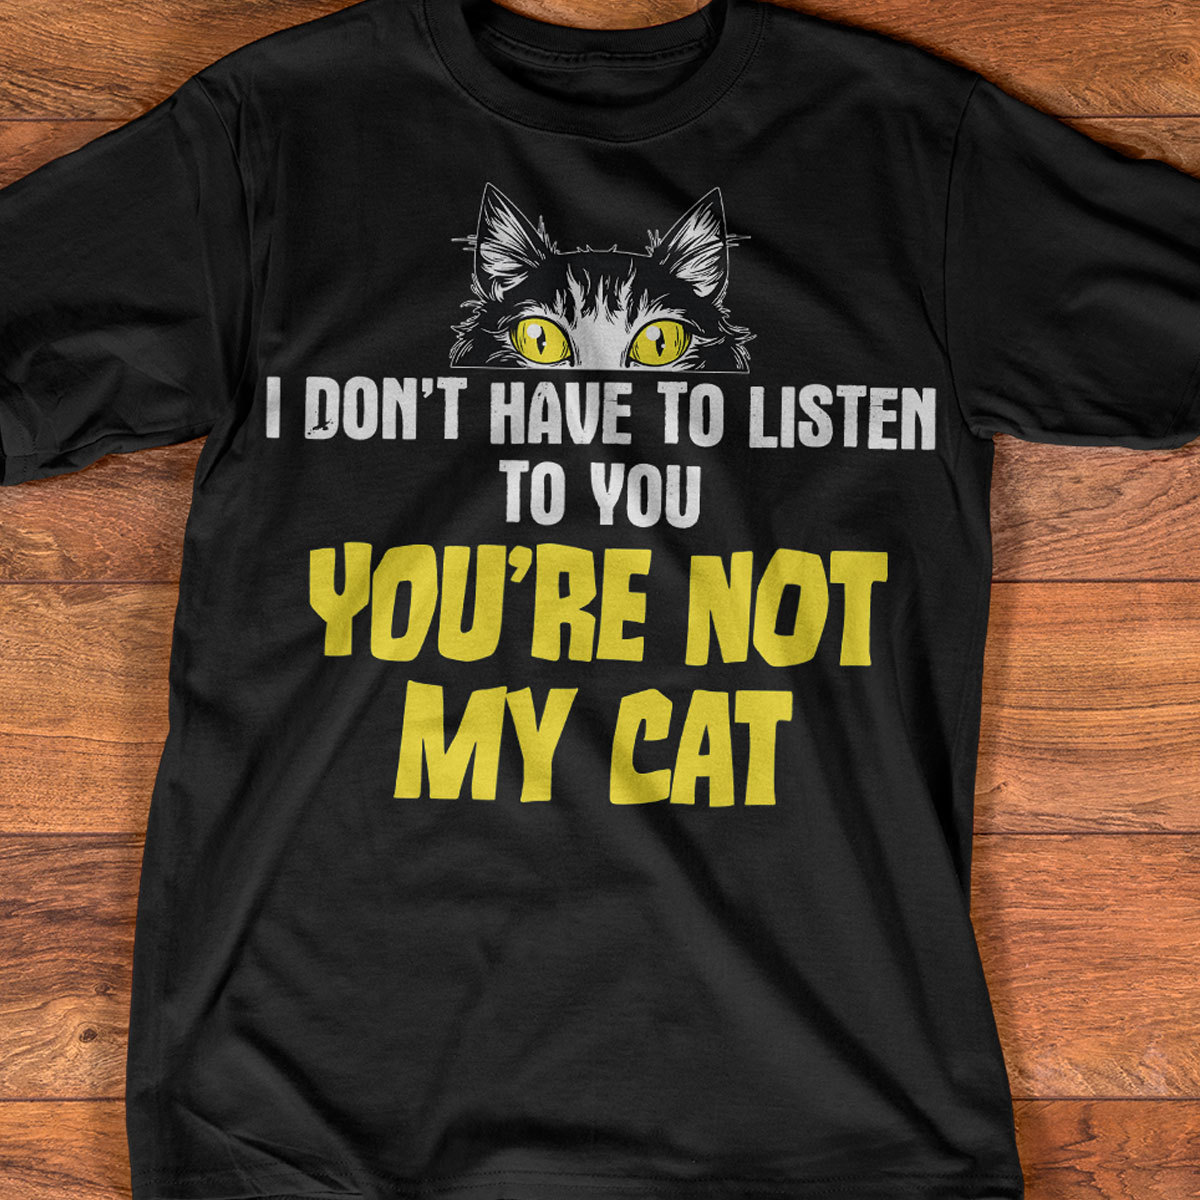 I don't have to listen to you You're not my cat - Black cat